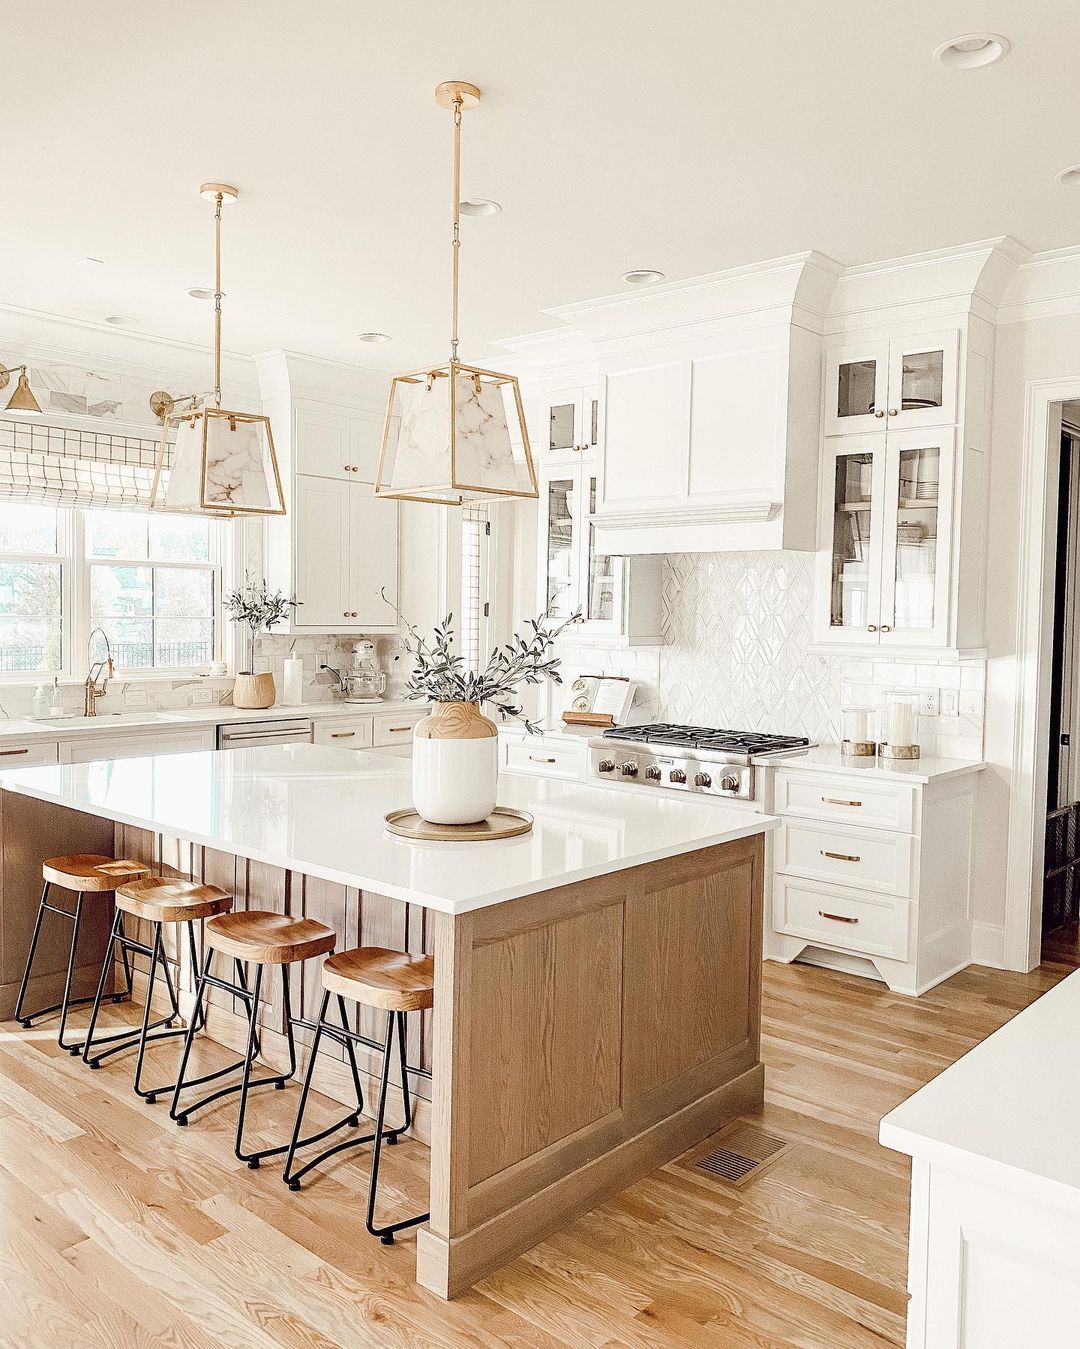 Farmhouse Style Kitchen with White Cabinets and Walls. Photo by Instagram user @ourfauxfarmhouse